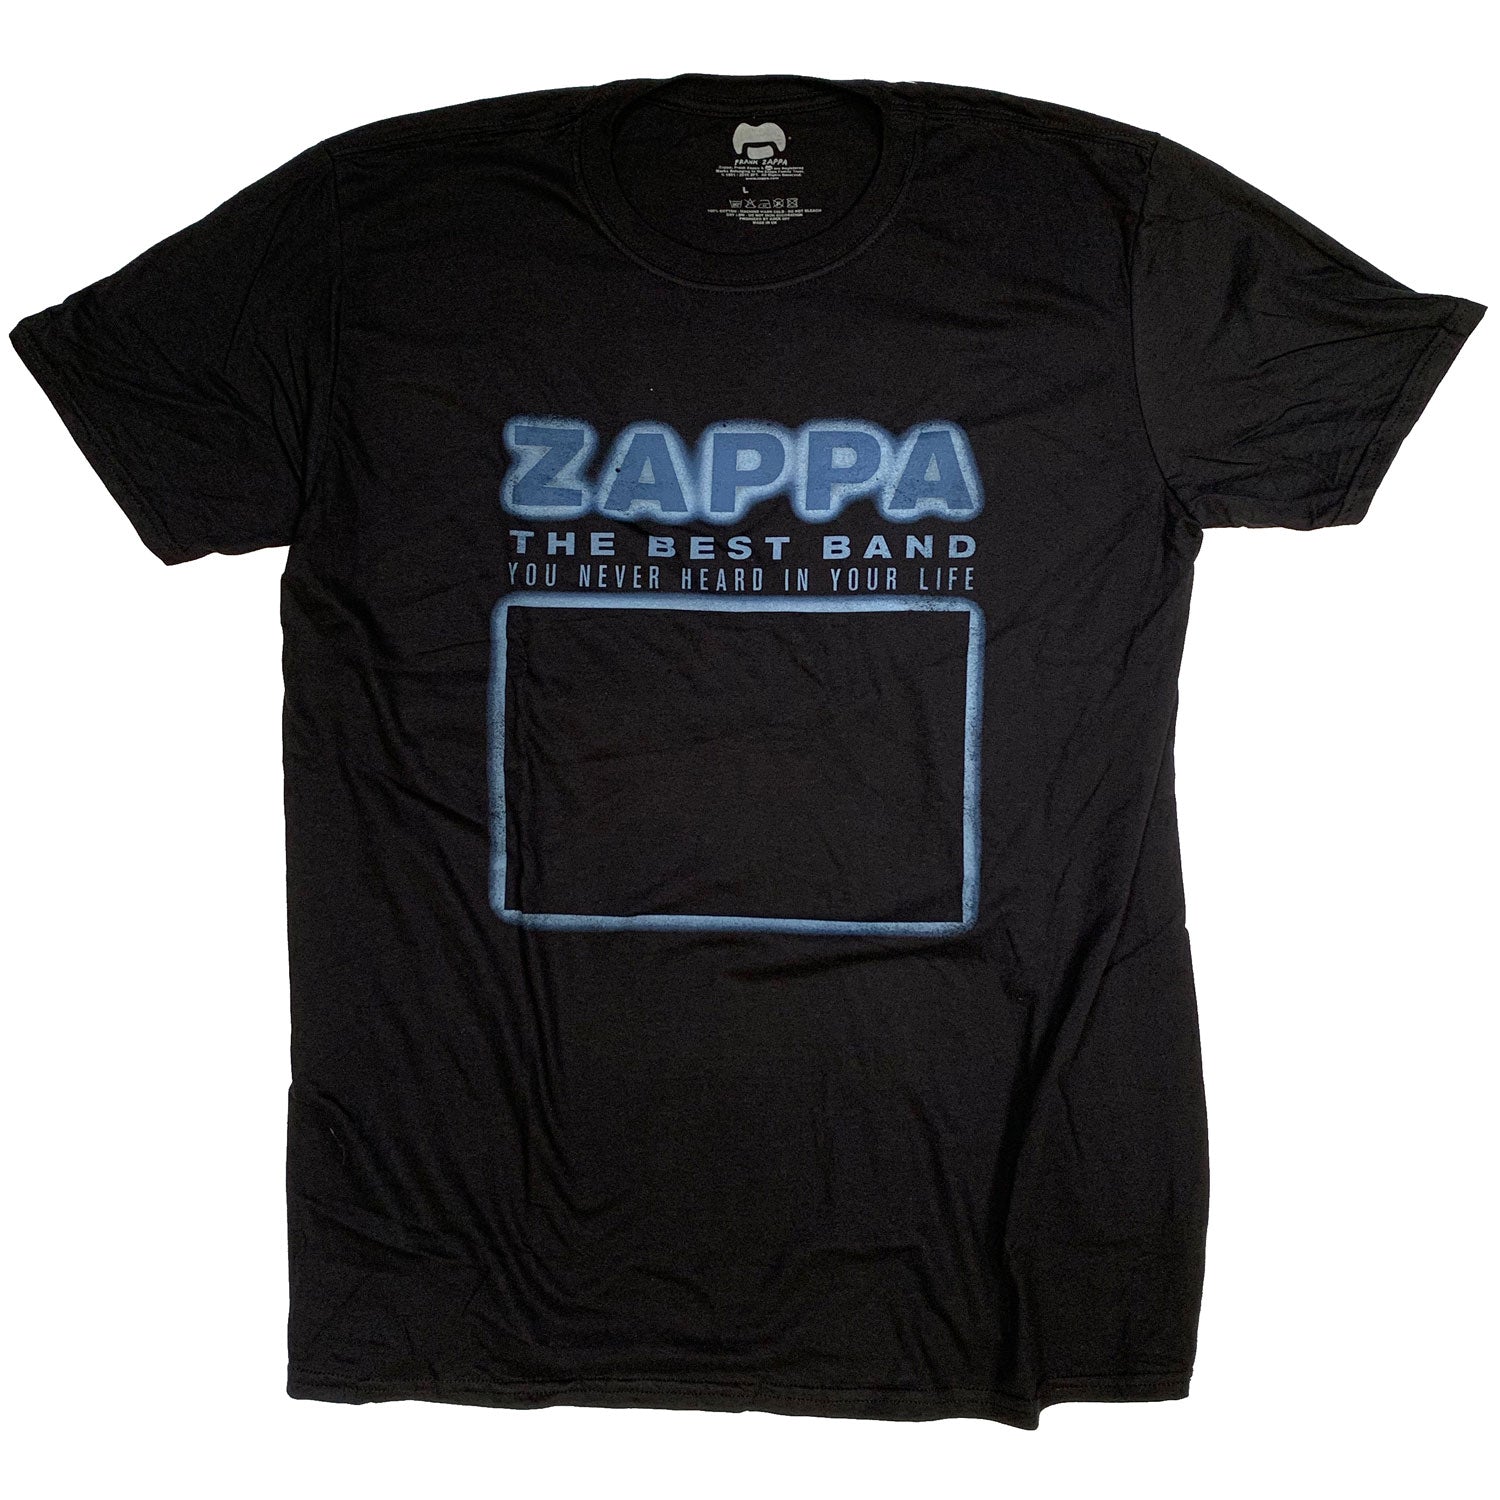 Frank Zappa T Shirt - The Best Band You've Never Heard In Your Life 100% Official